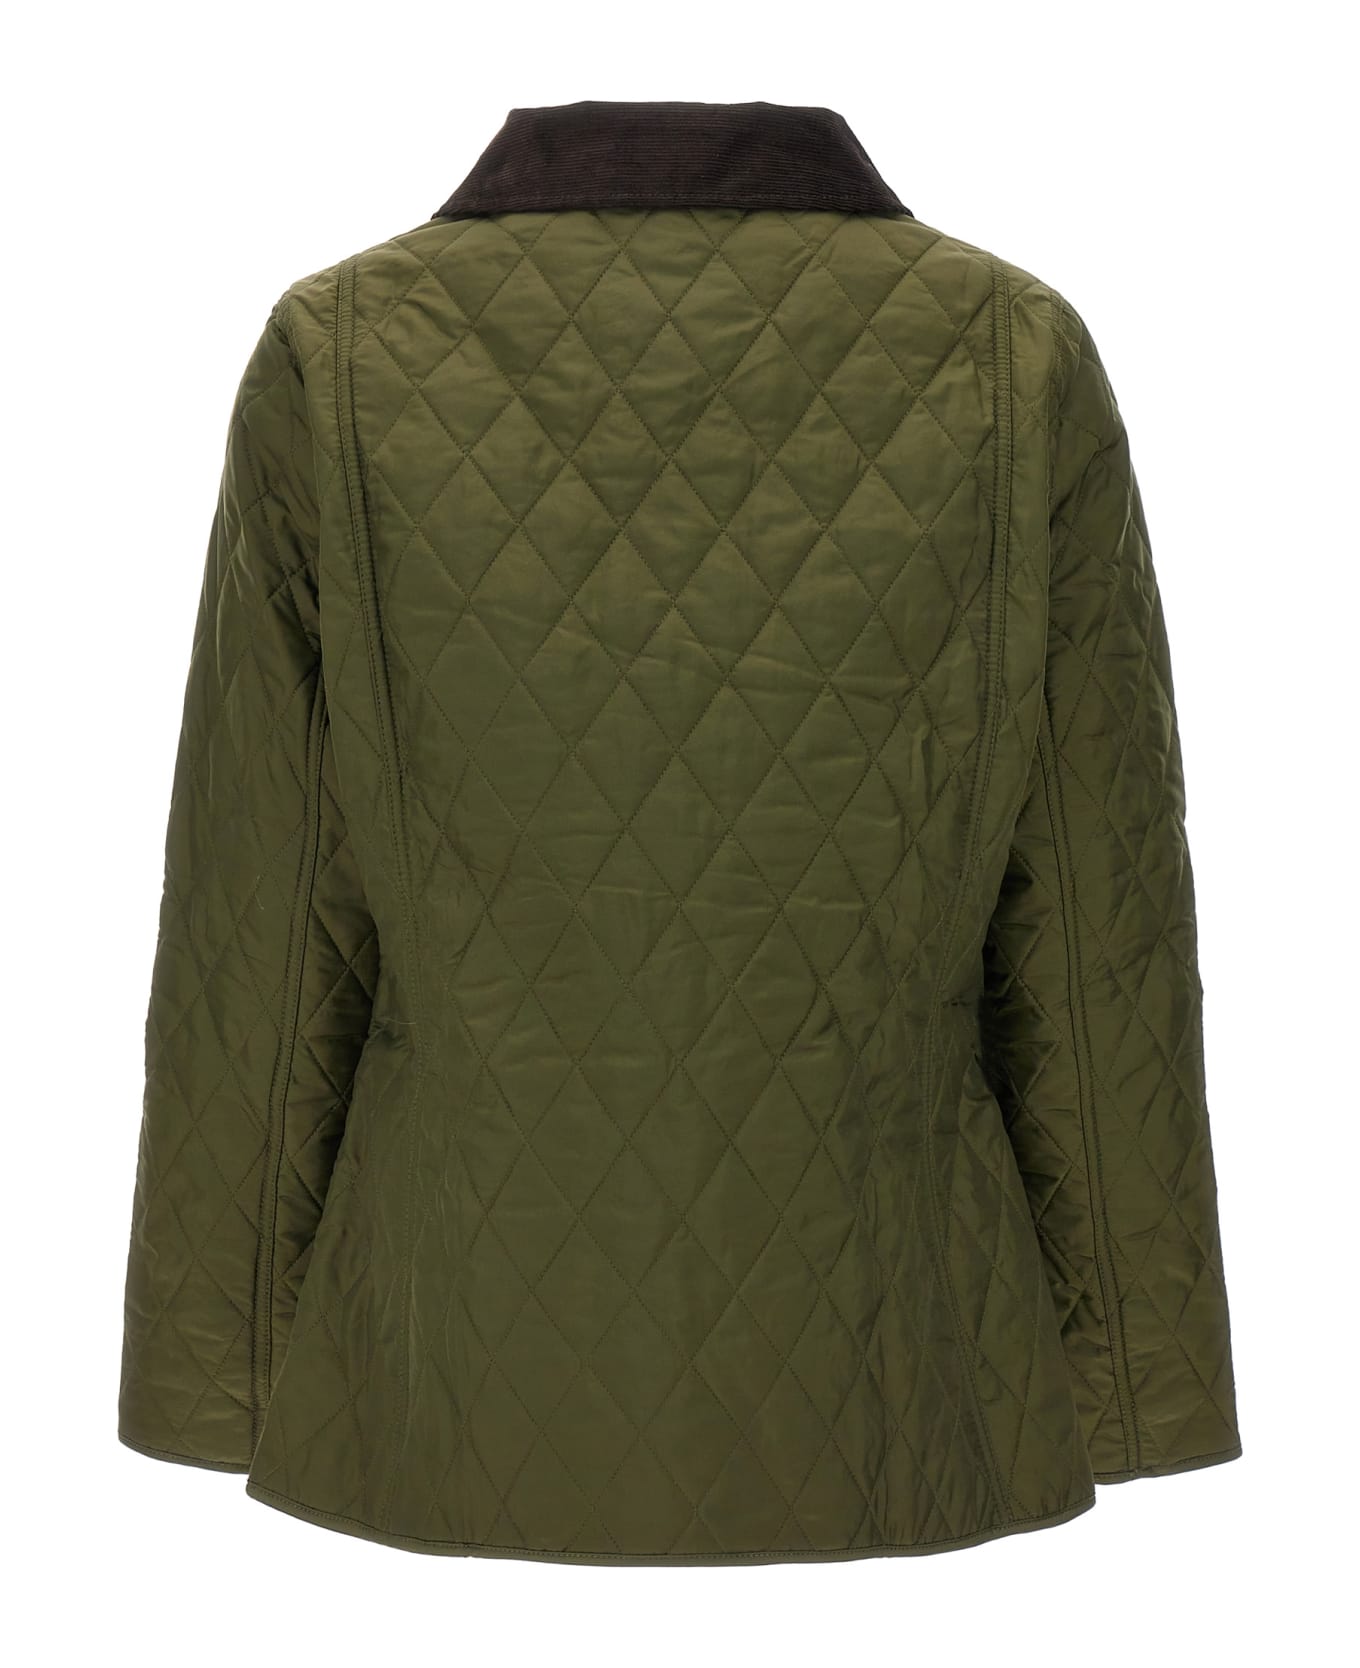 Barbour 'annandale' Jacket - Green